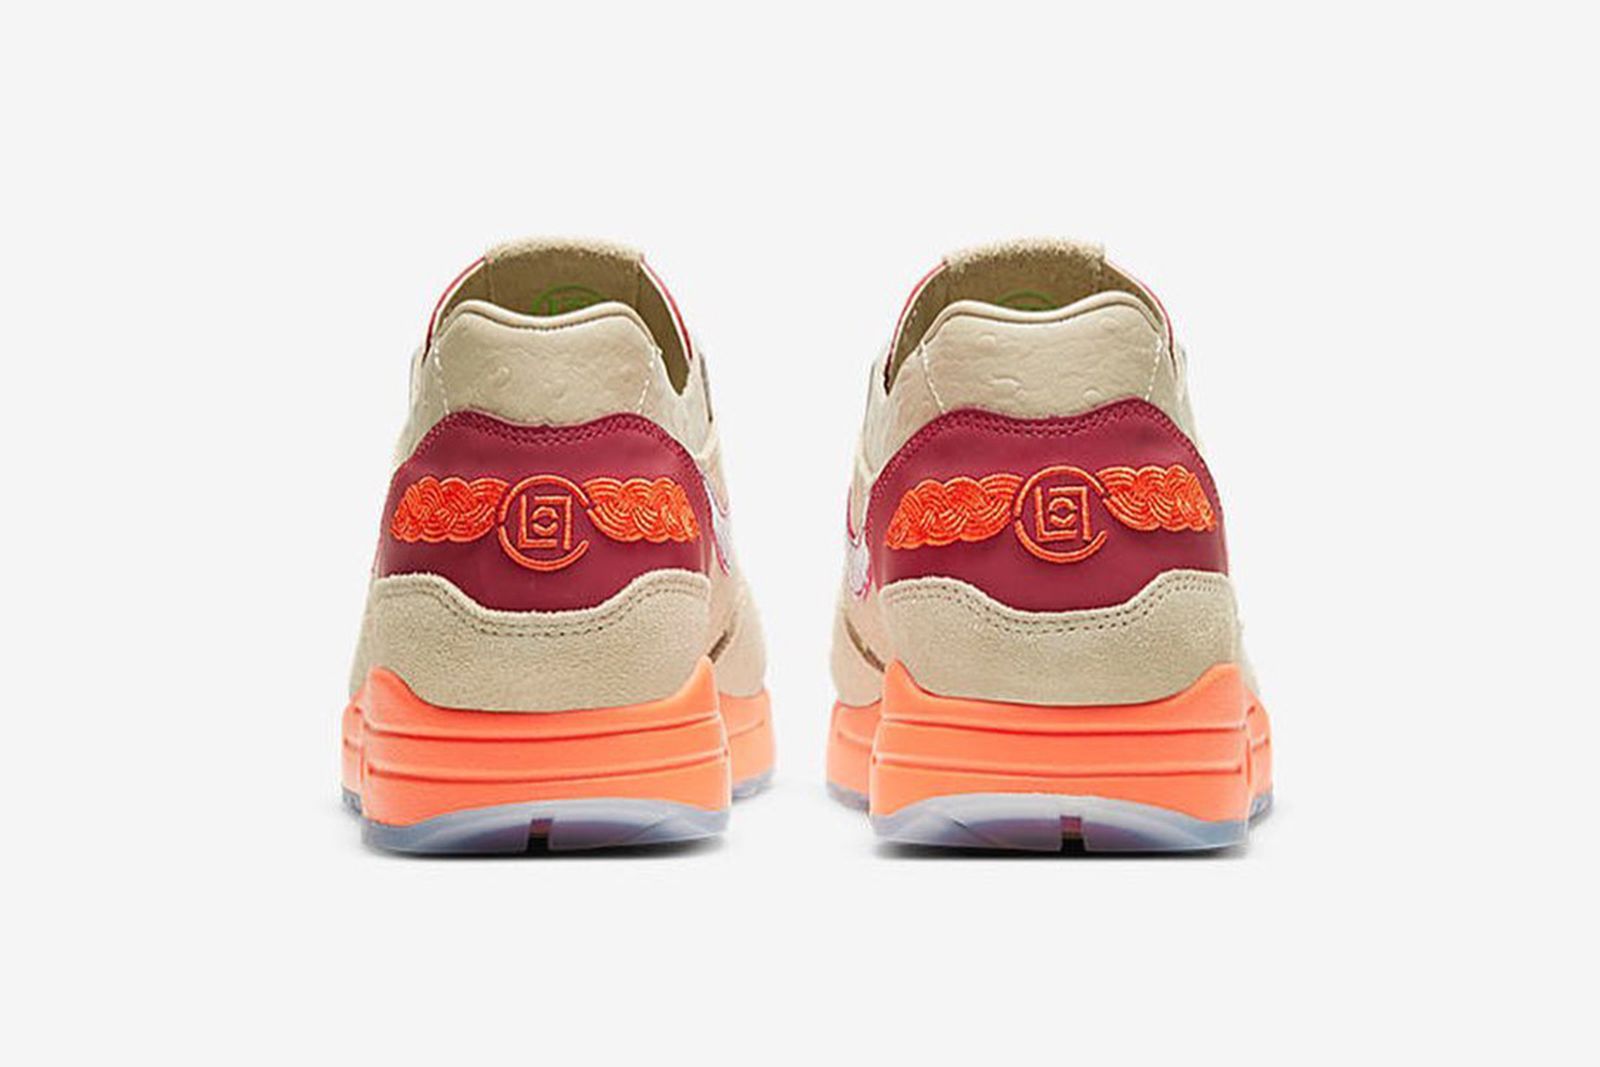 clot-nike-air-max-1-kiss-of-death-2021-release-date-price-03